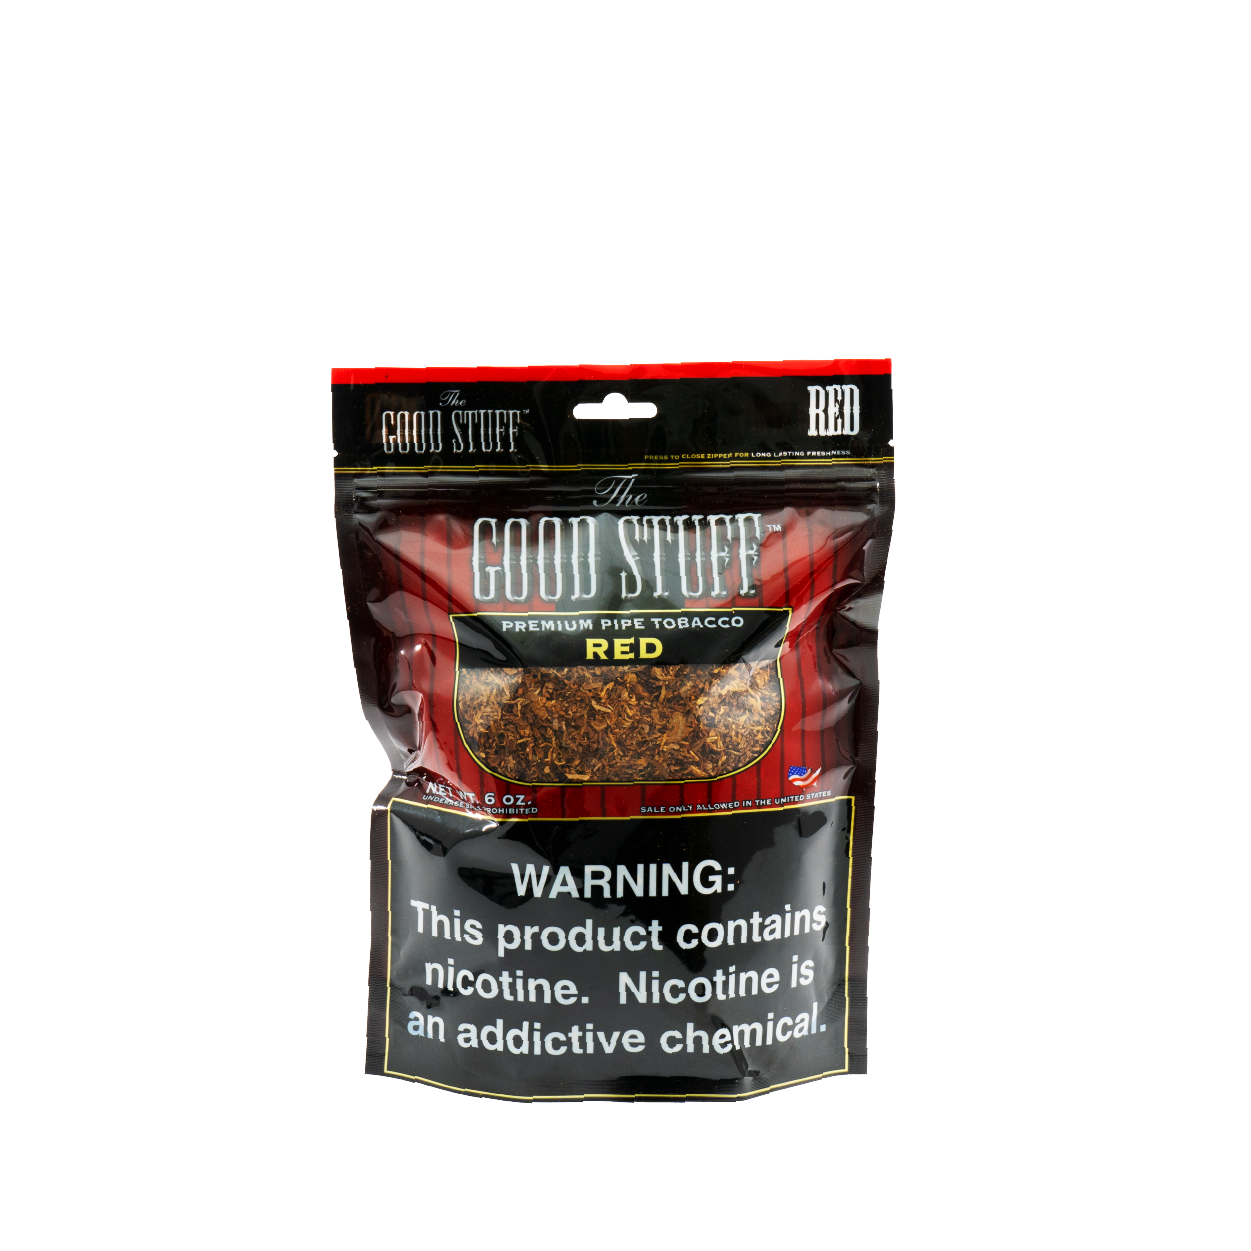 https://www.privateertobacco.com/wp-content/uploads/2022/03/Products-Good-Stuff_Red_6oz.png